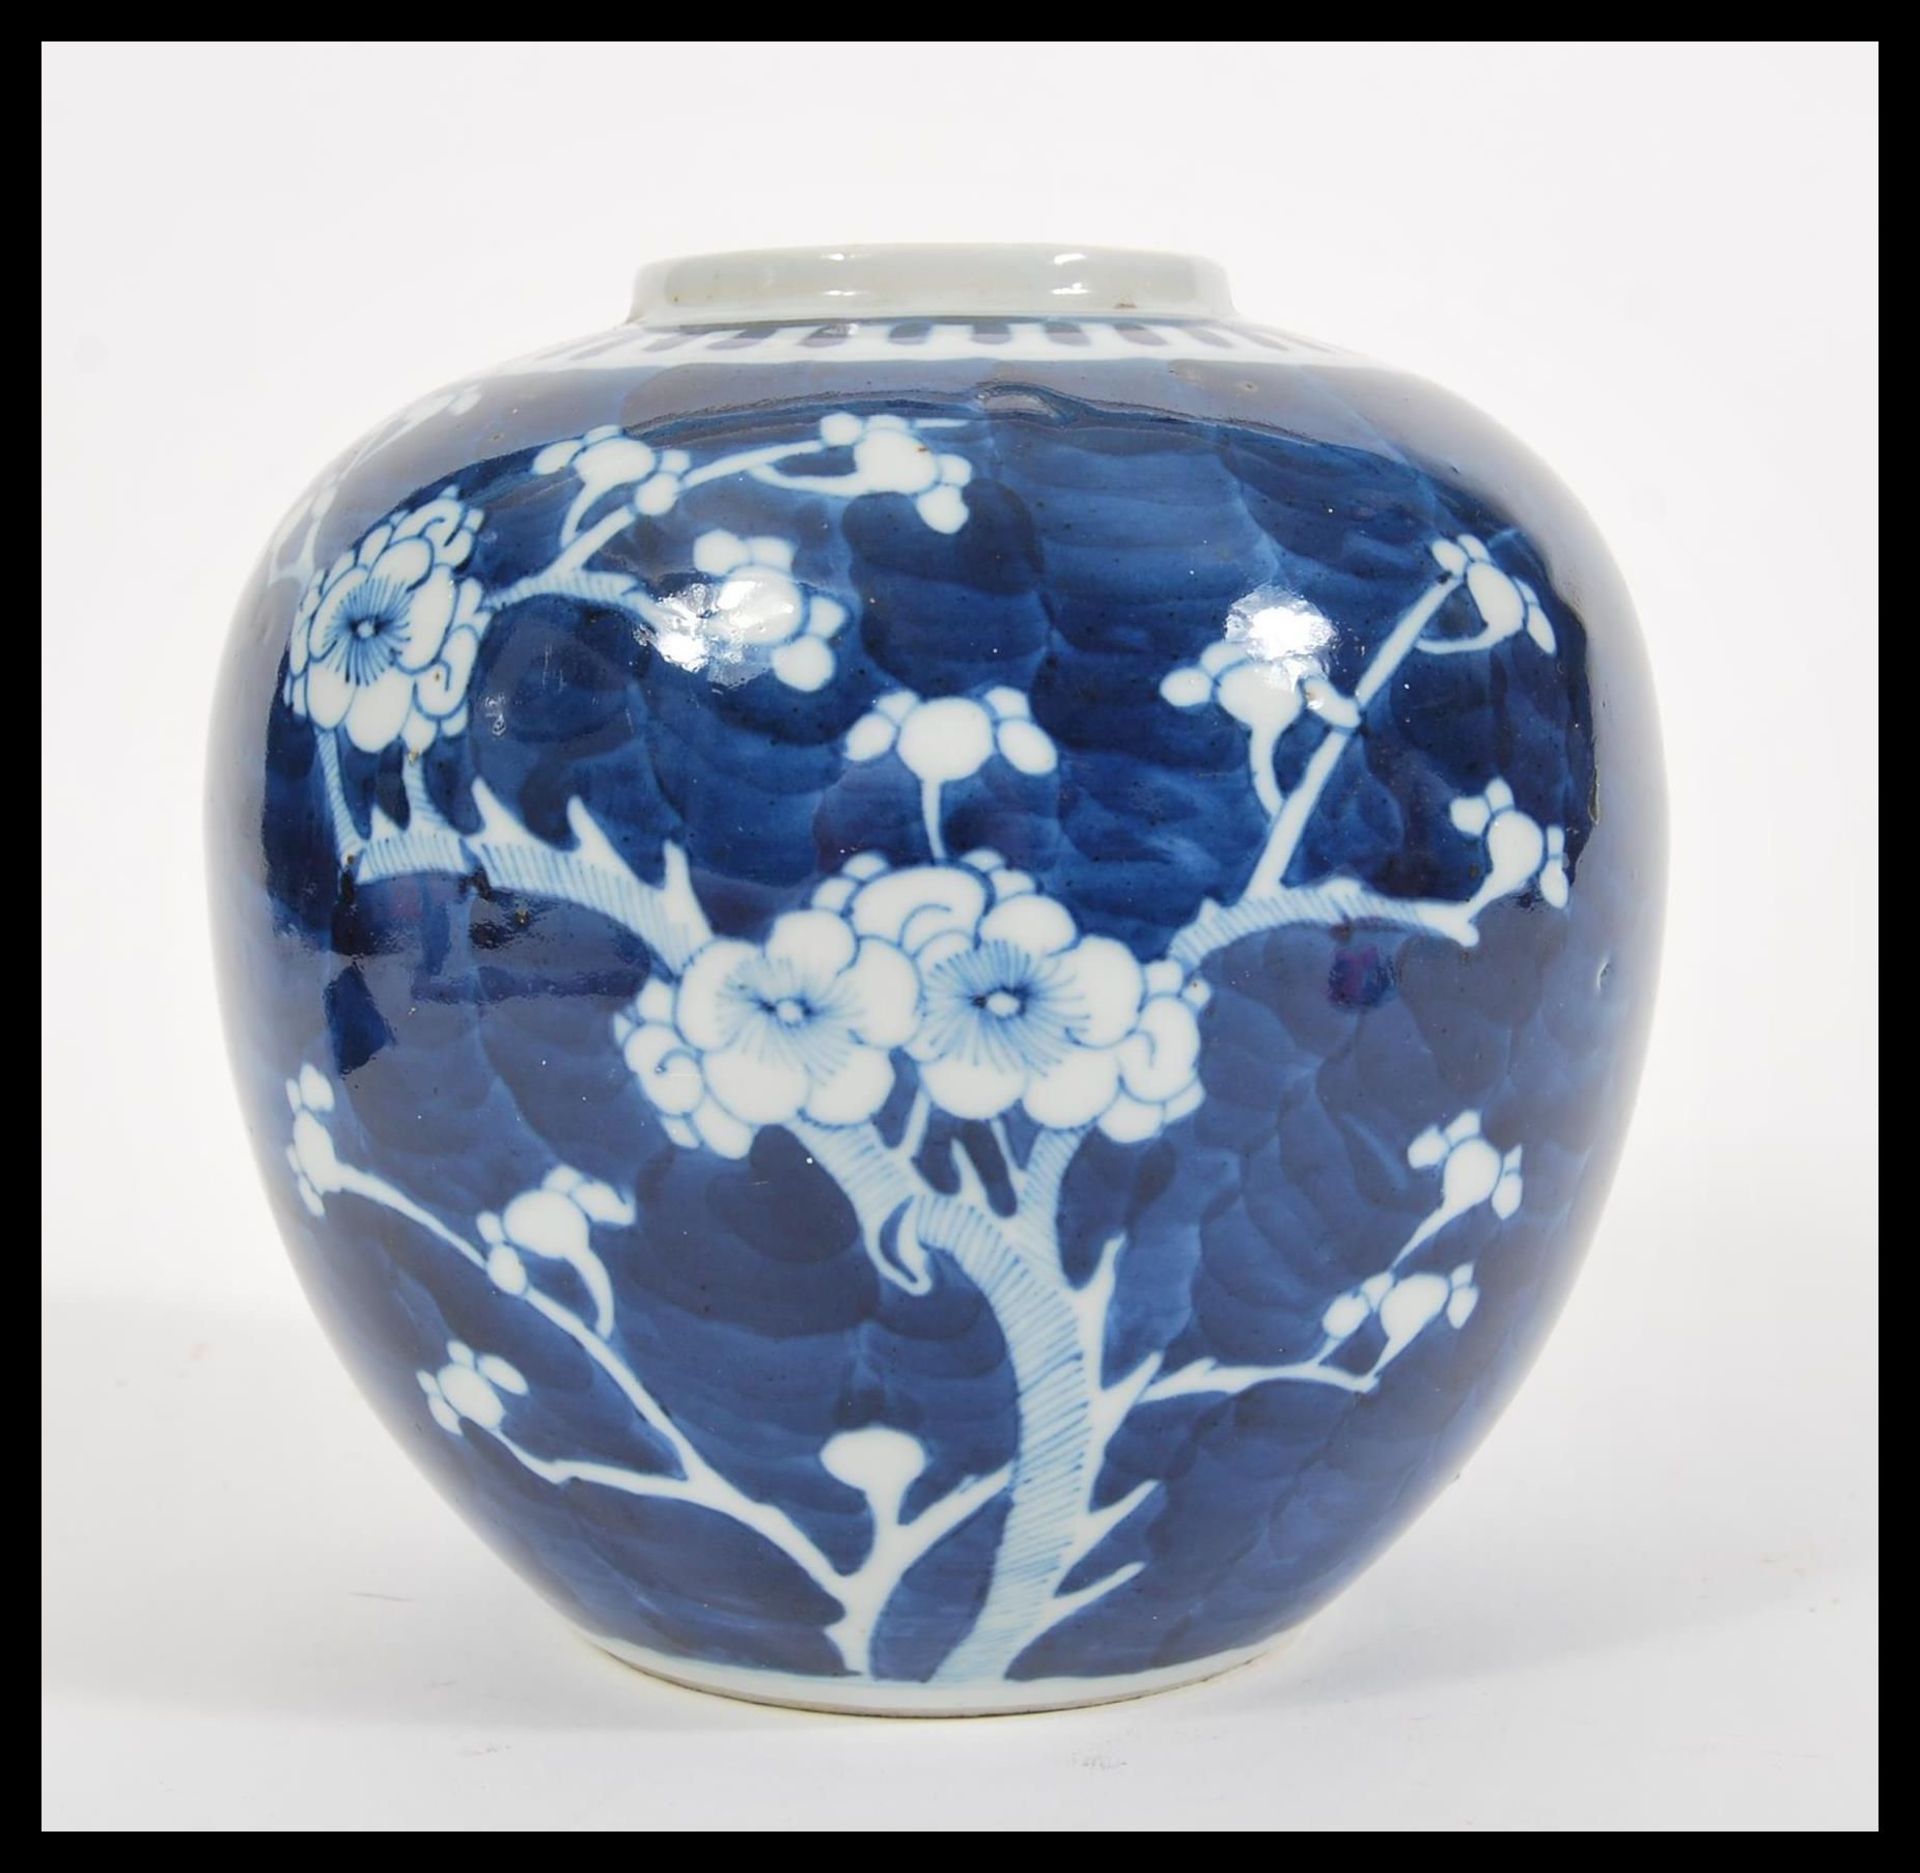 A 19th Century Chinese blue and white ginger jar and cover hand decorated in the prunus pattern.